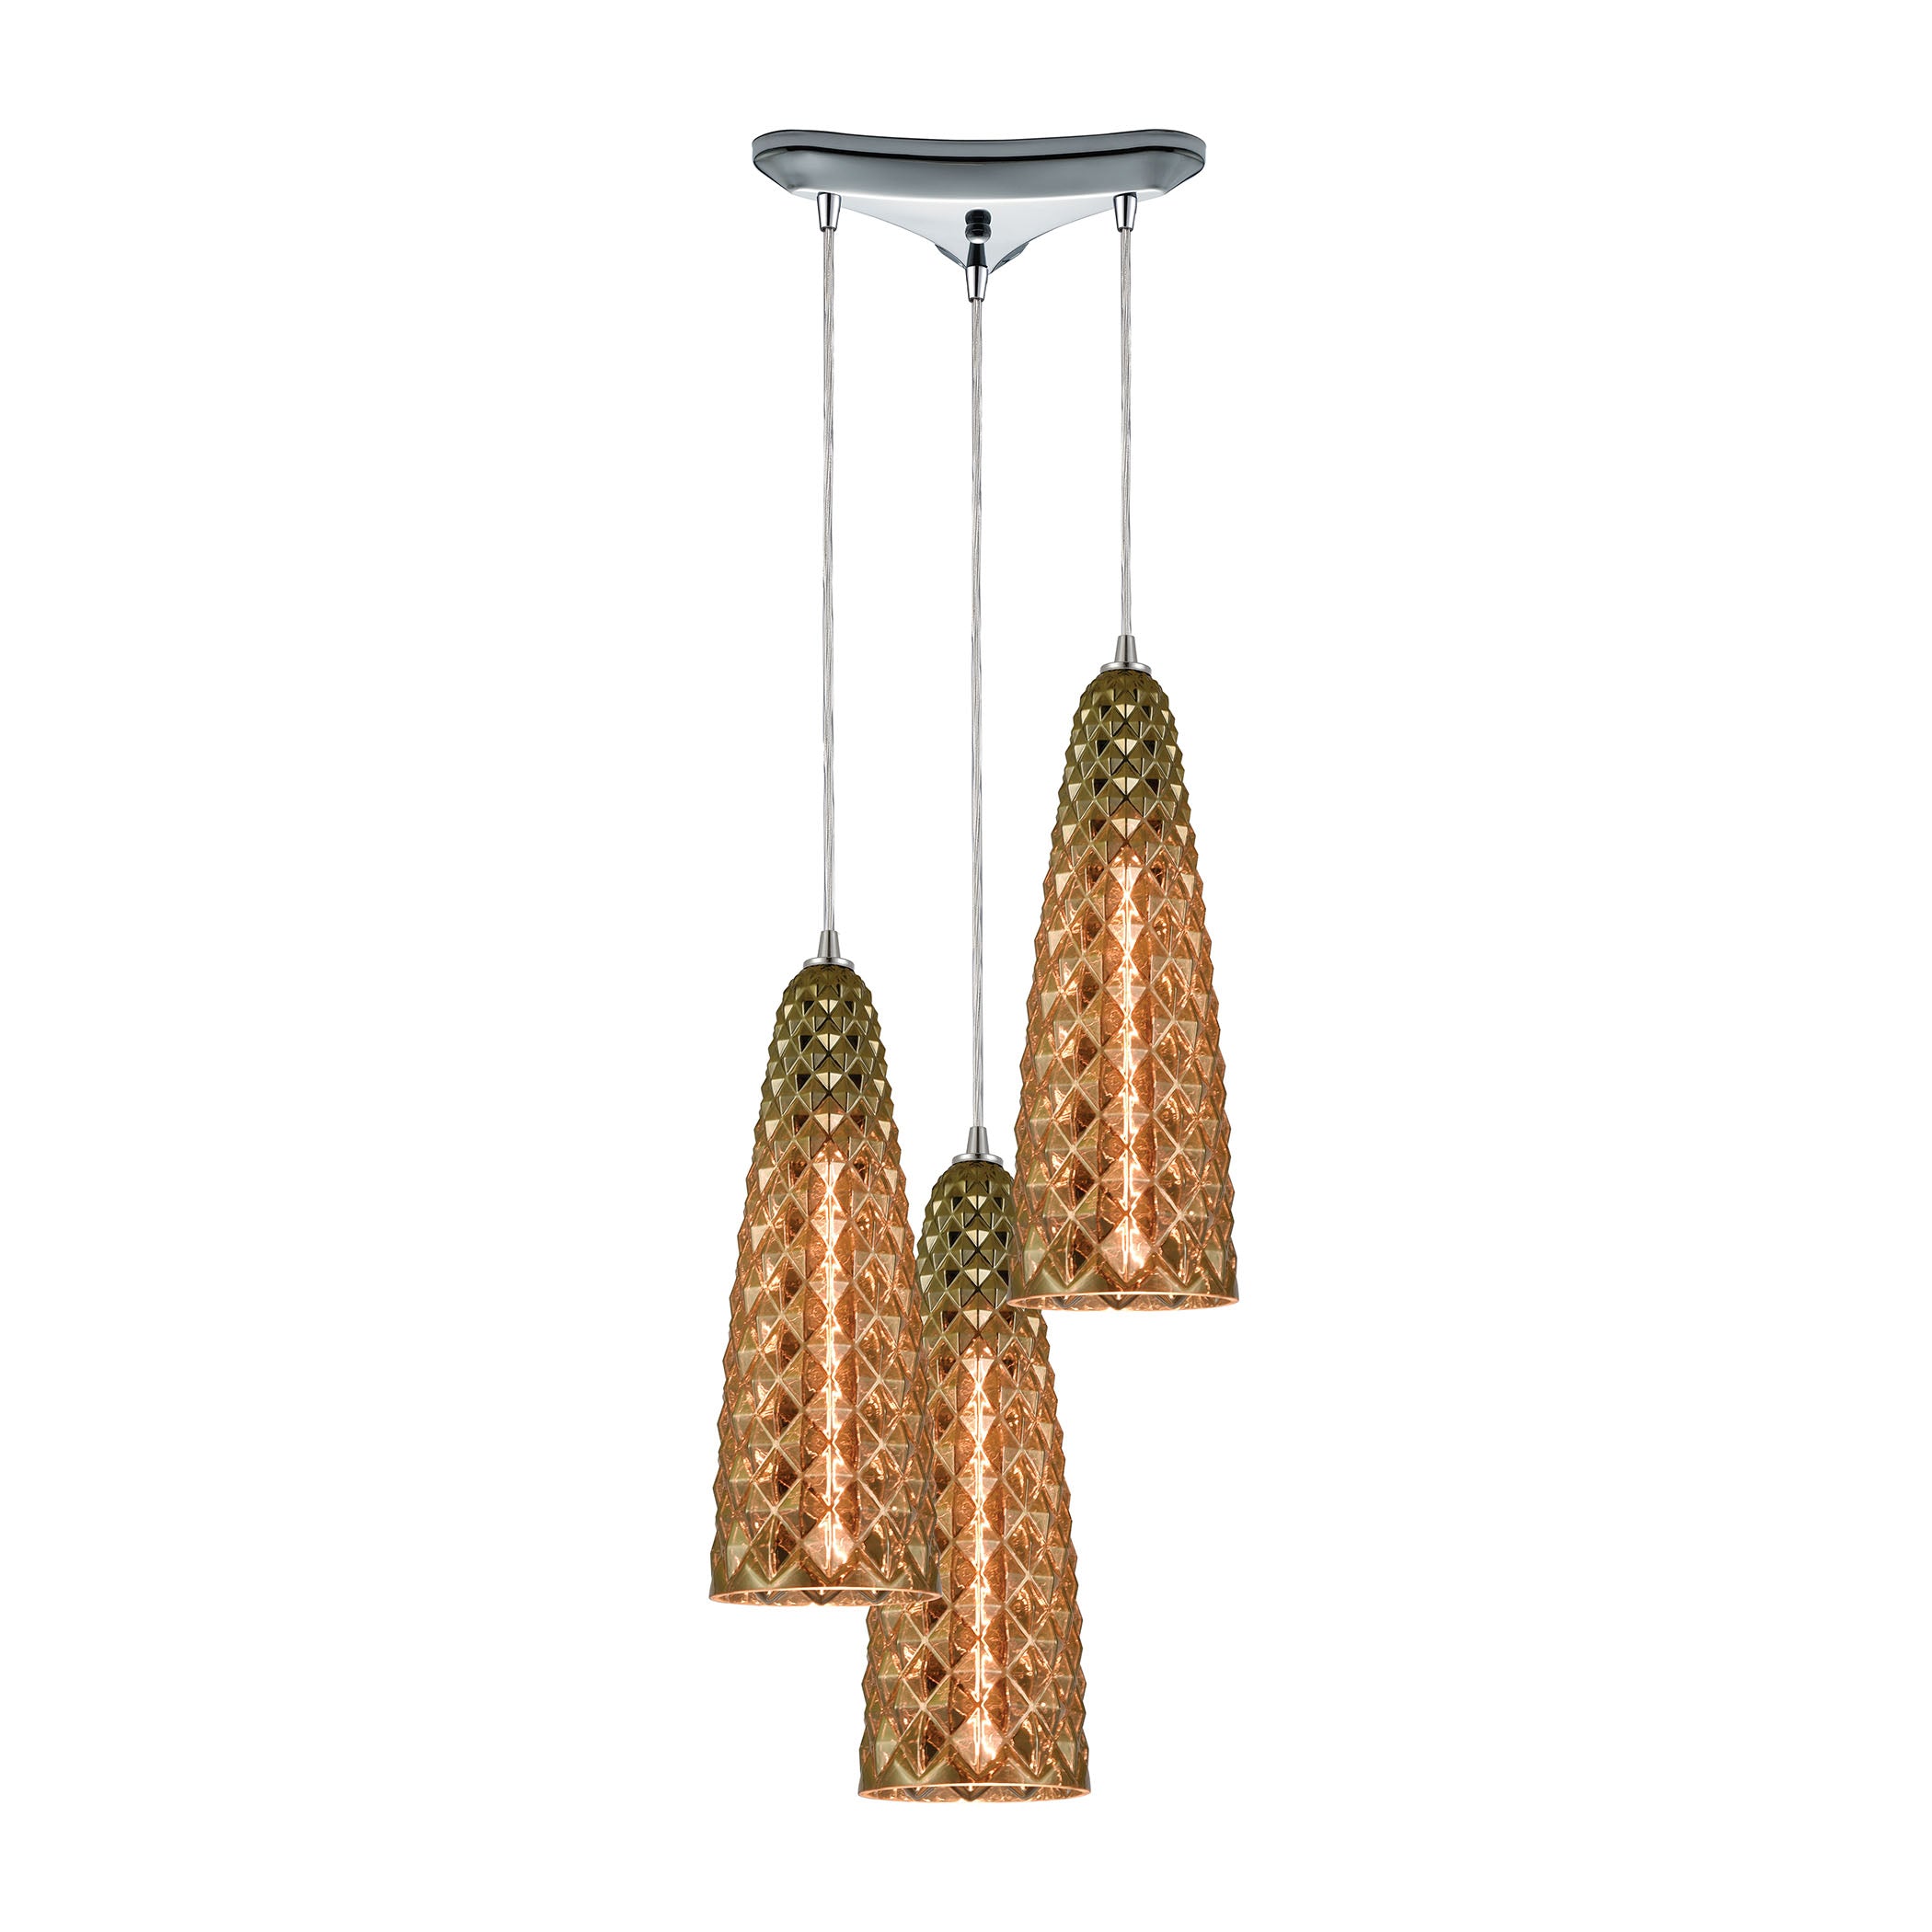 ELK Lighting 21168/3 Glitzy 3-Light Triangular Mini Pendant Fixture in Polished Chrome with Golden Bronze Plated Glass